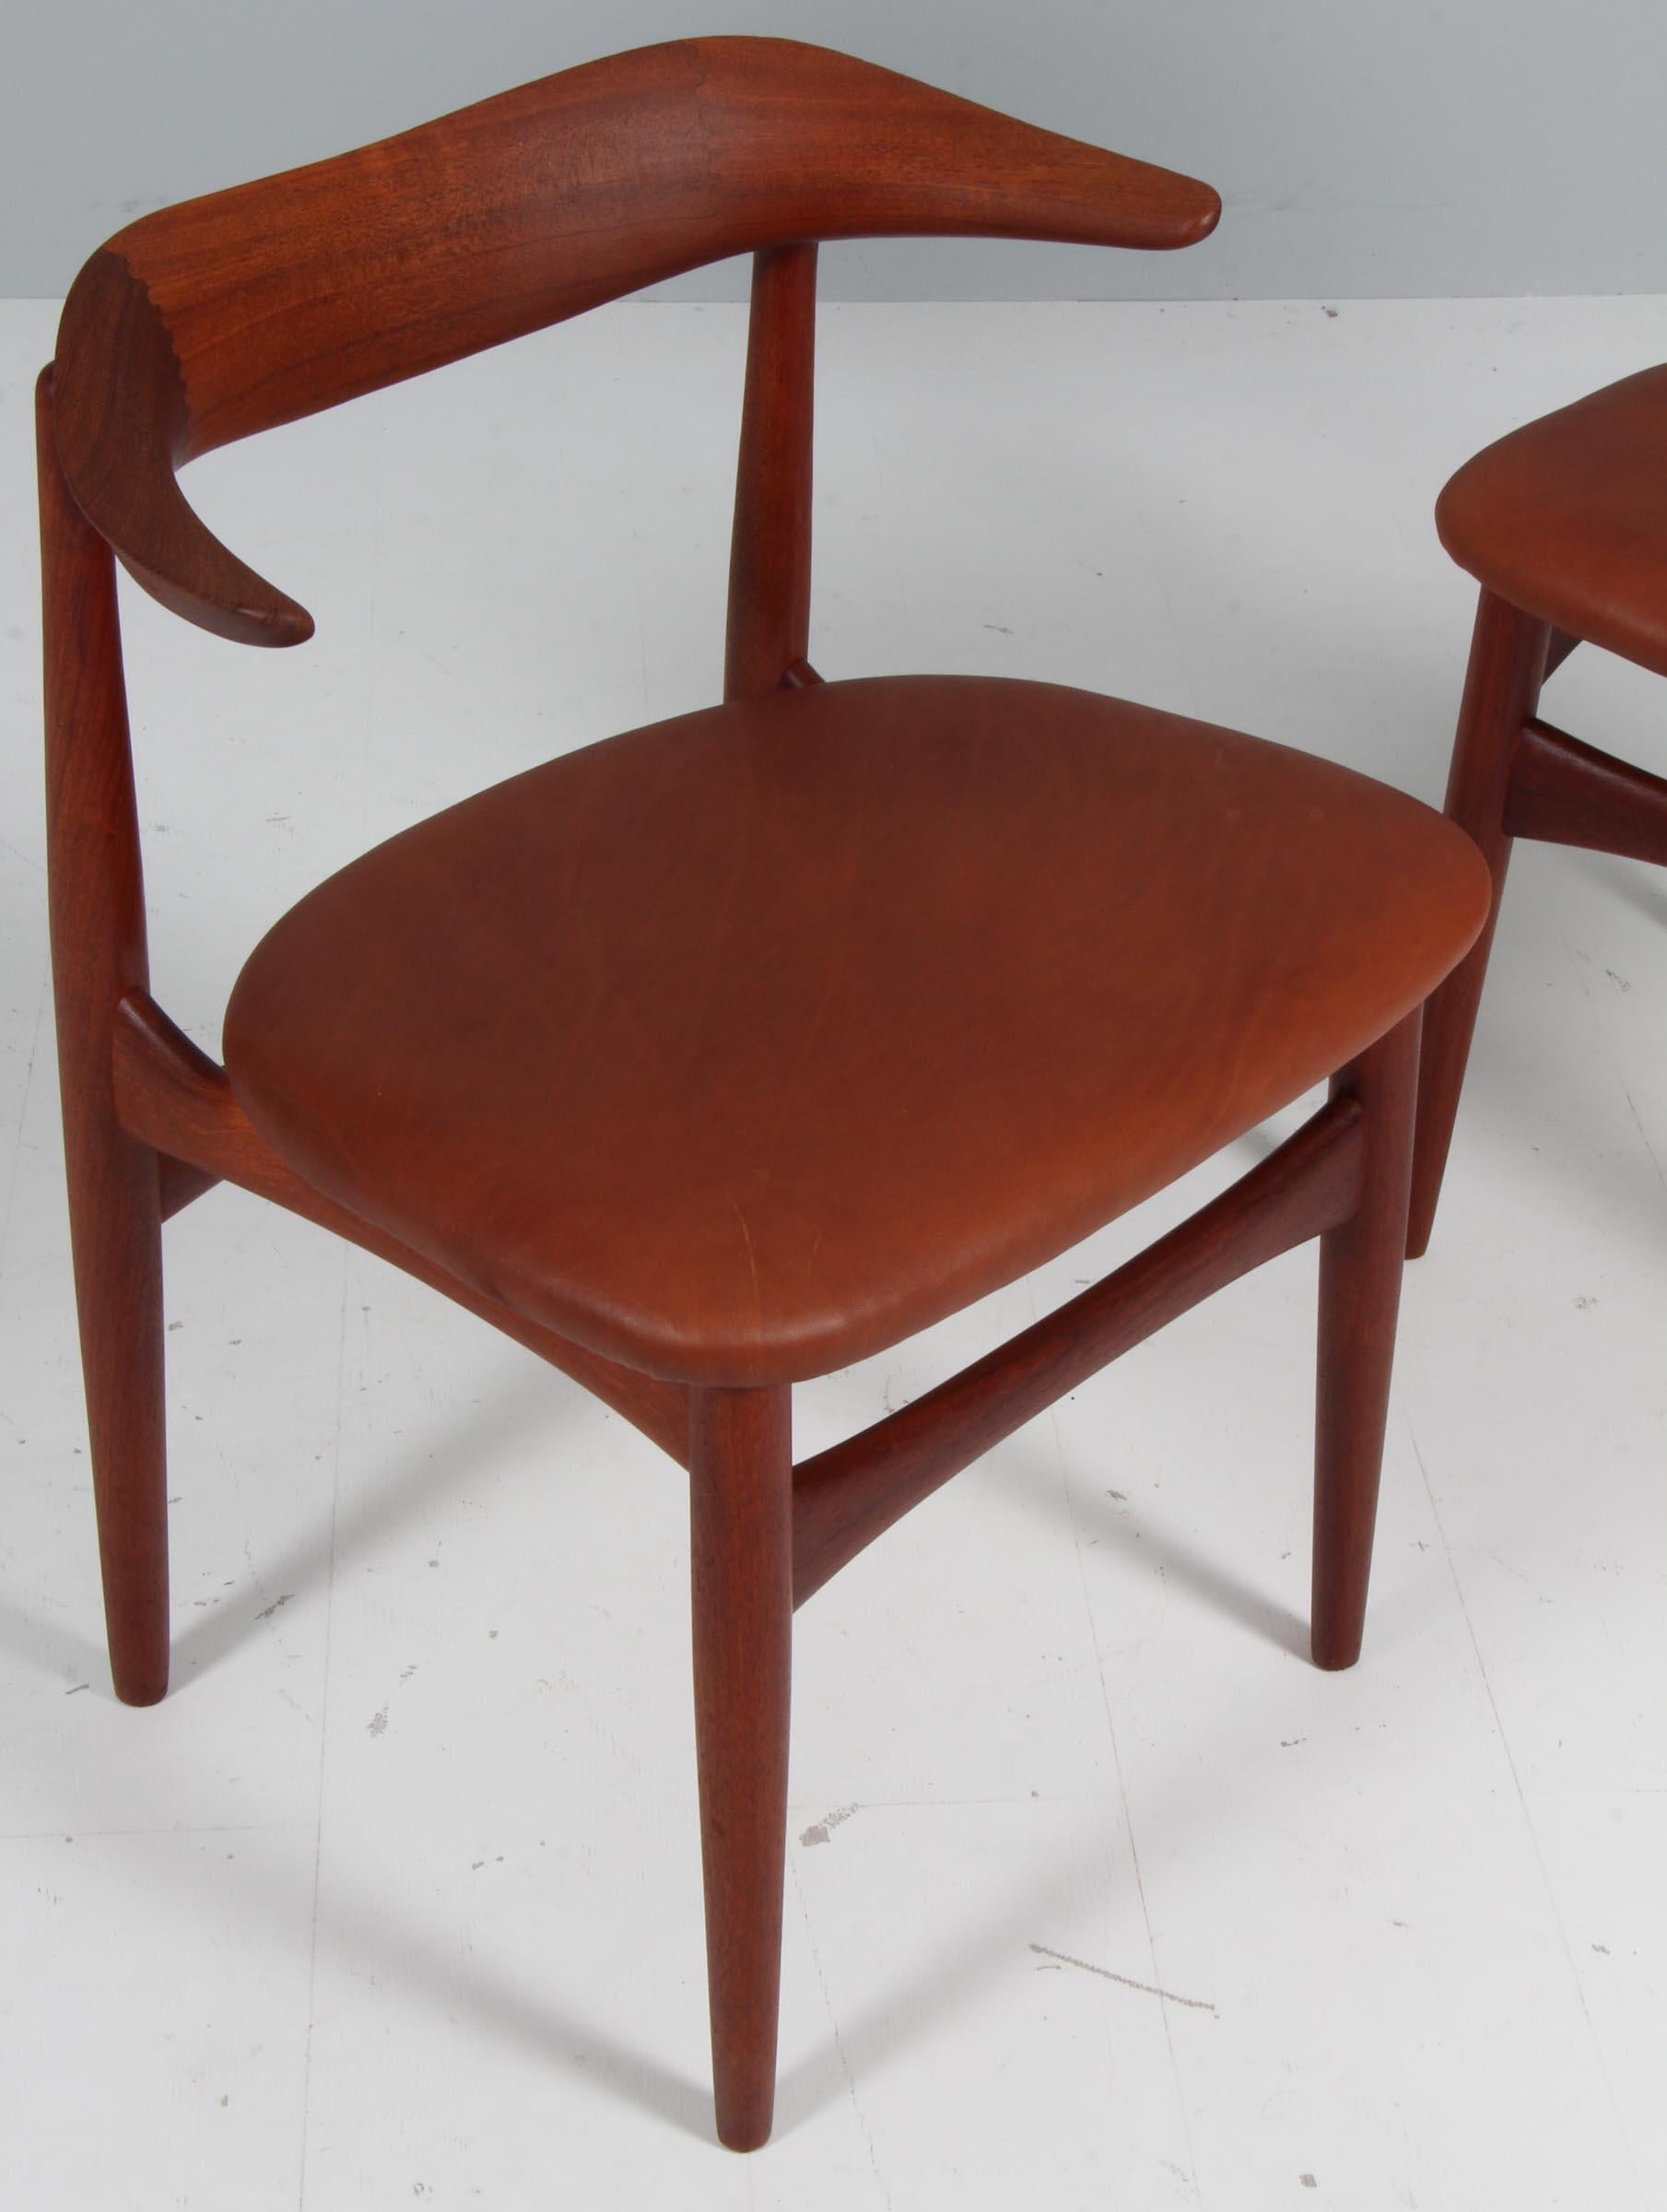 Knud Færch Cowhorn Arm Chairs, 1960s, teak In Good Condition For Sale In Esbjerg, DK